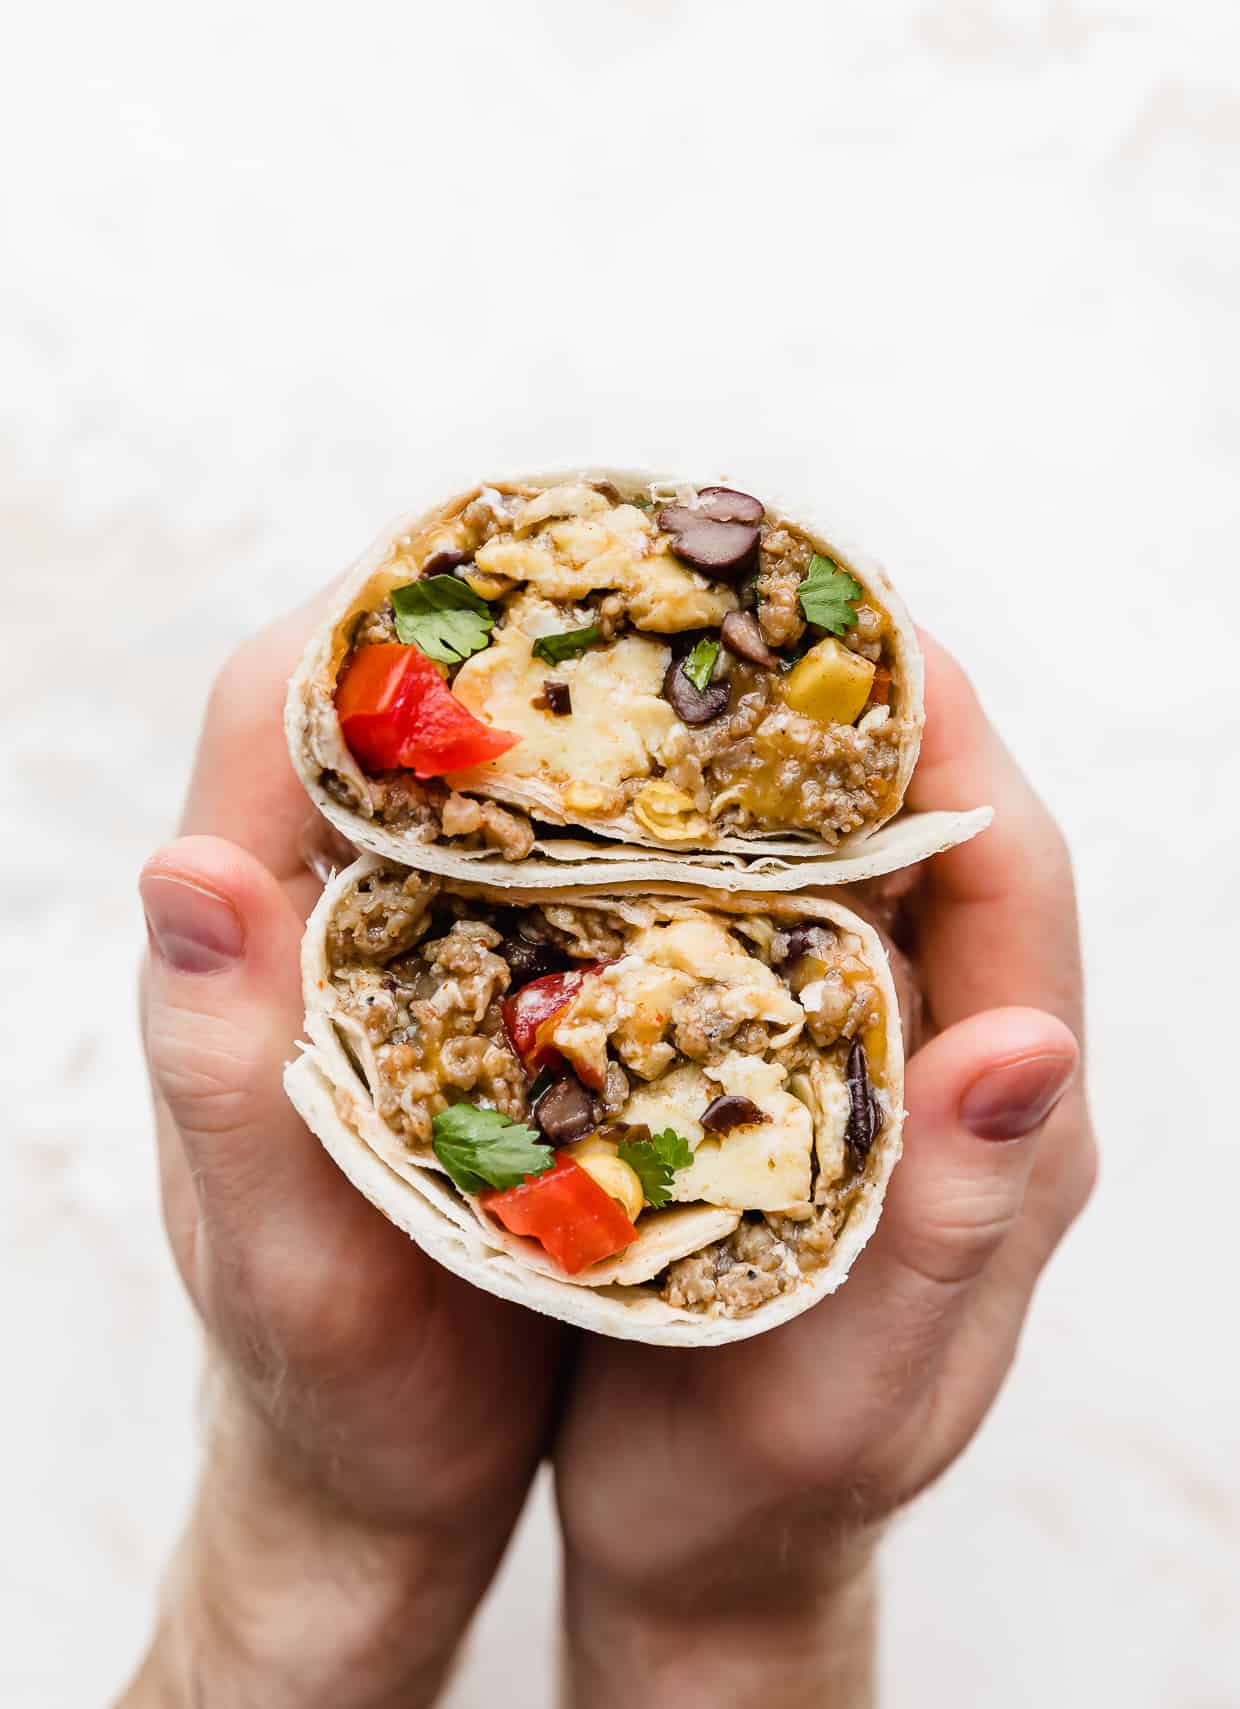 A set of hands holding a Breakfast Burrito with Black Beans and tomatoes that has been cut in half, to show the inside.